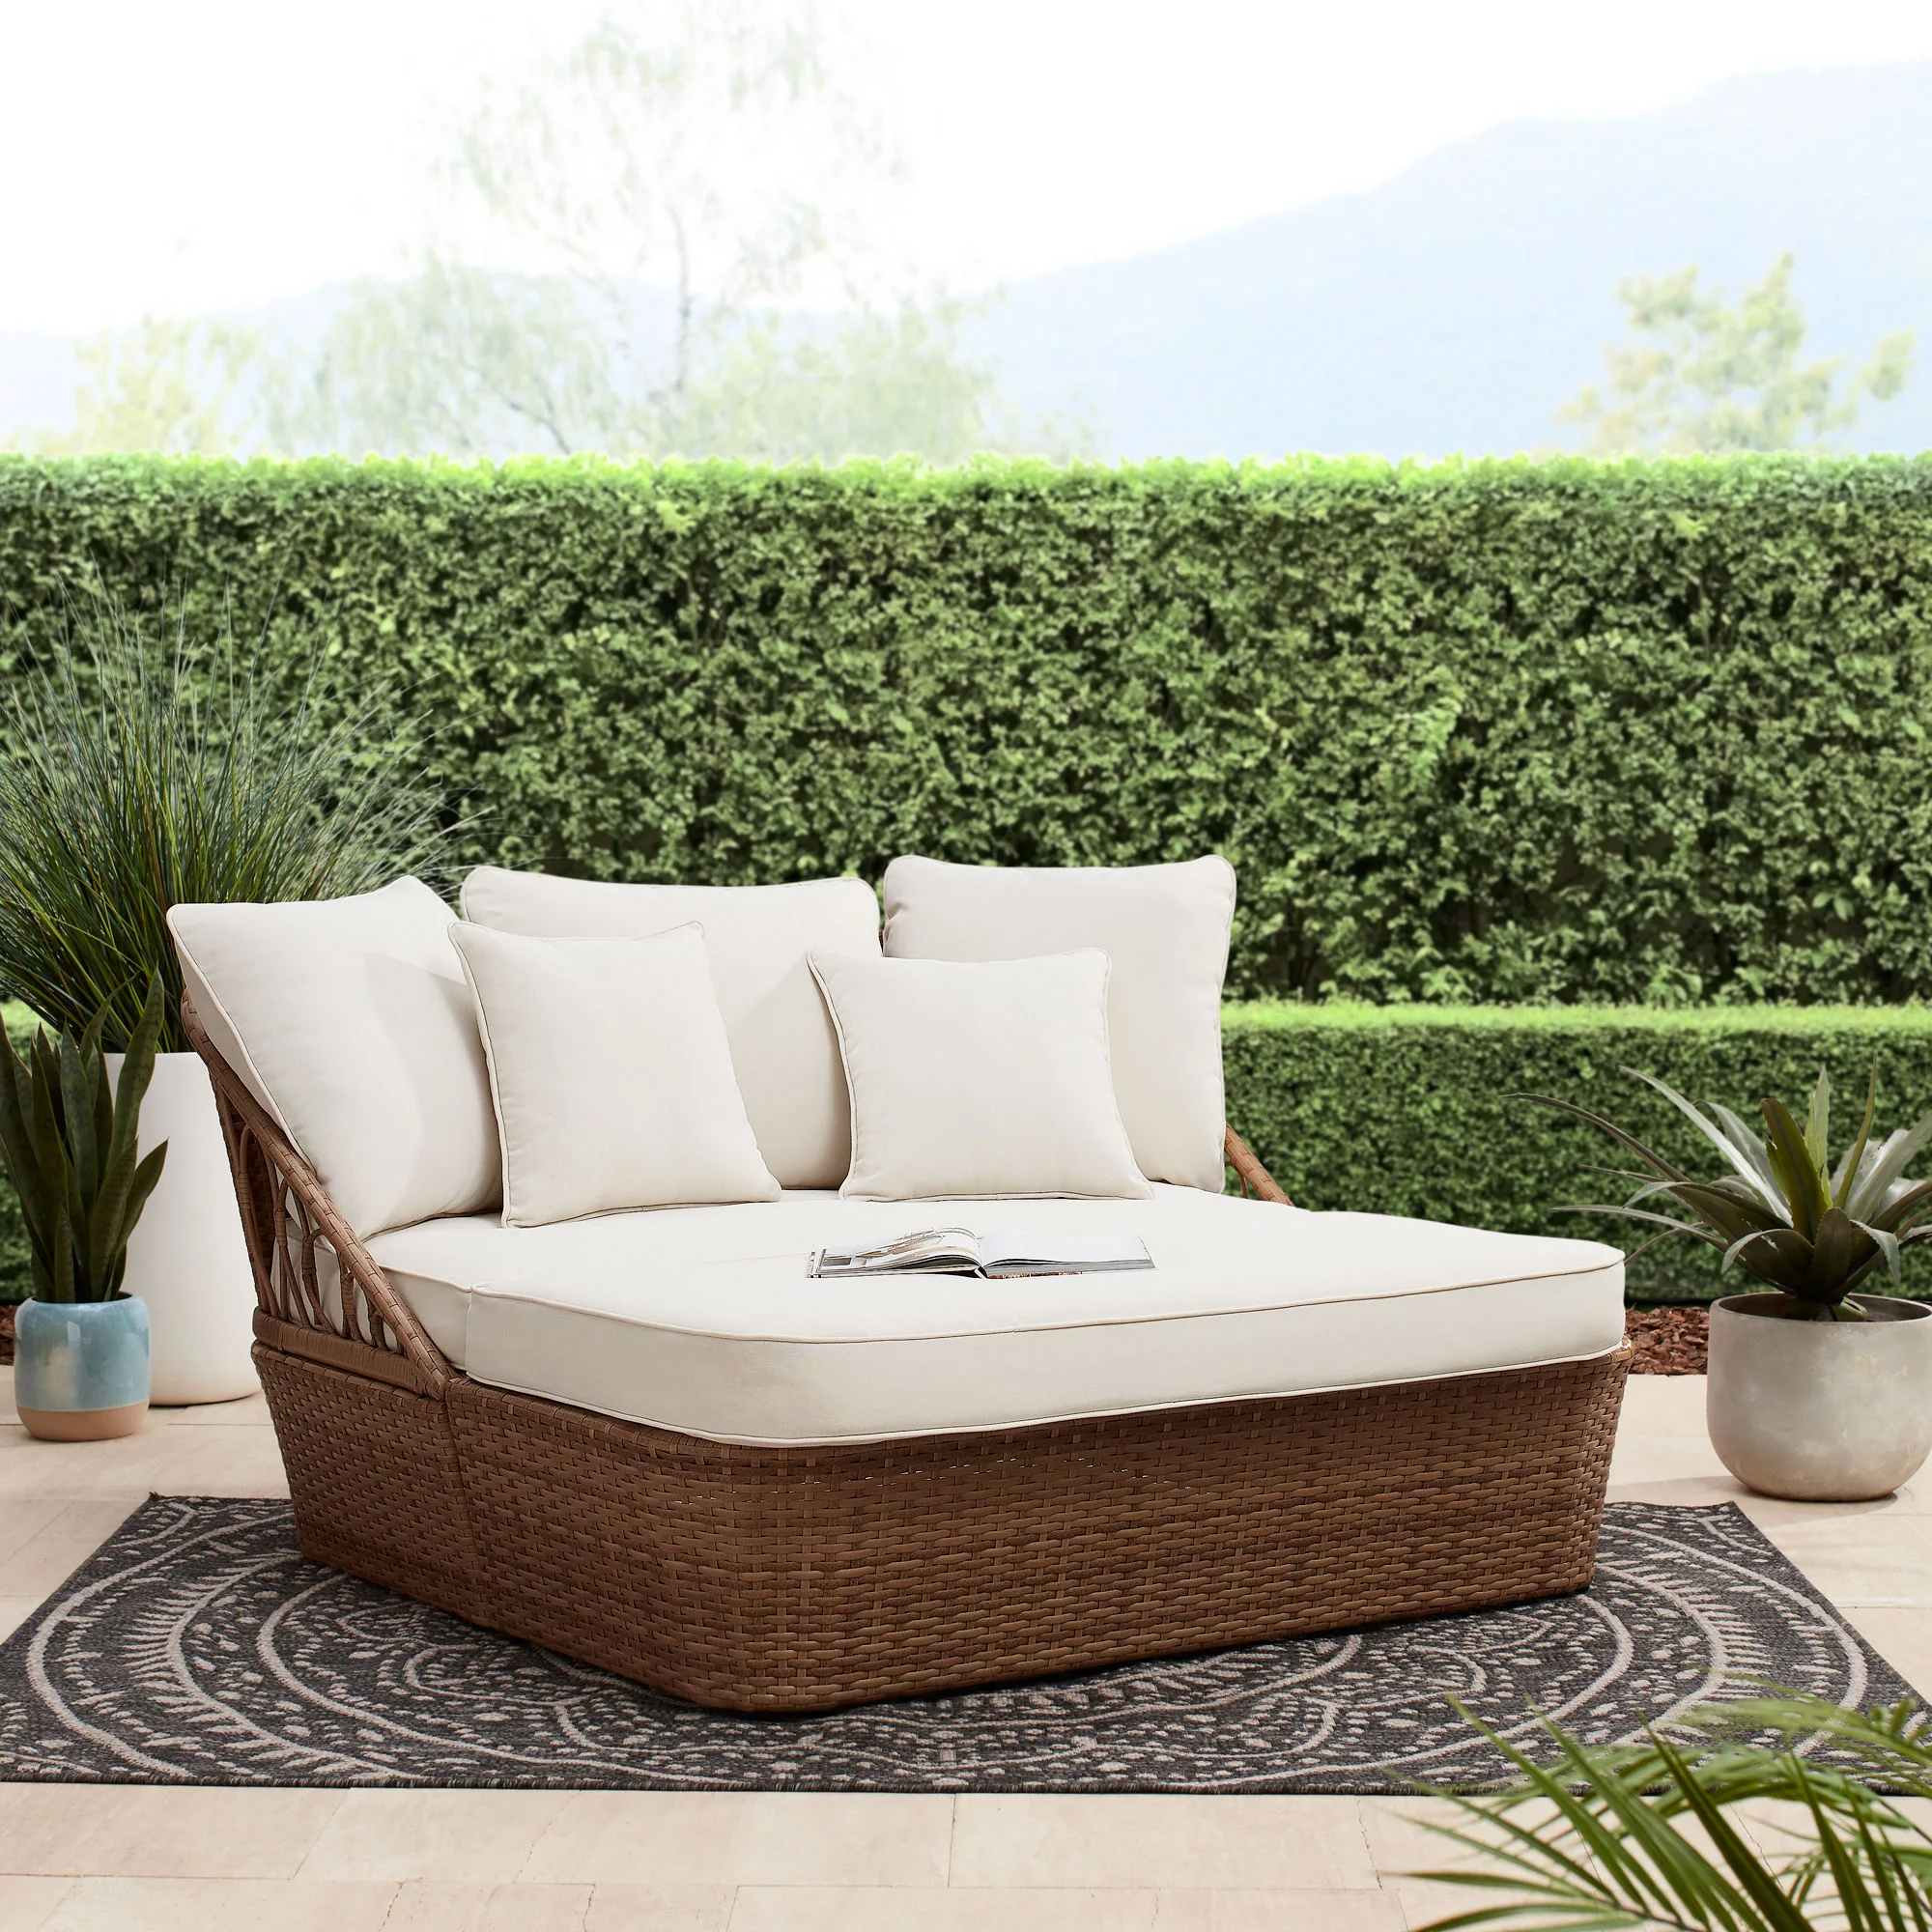 The Ultimate Outdoor Relaxation: Patio Daybeds for Any Space